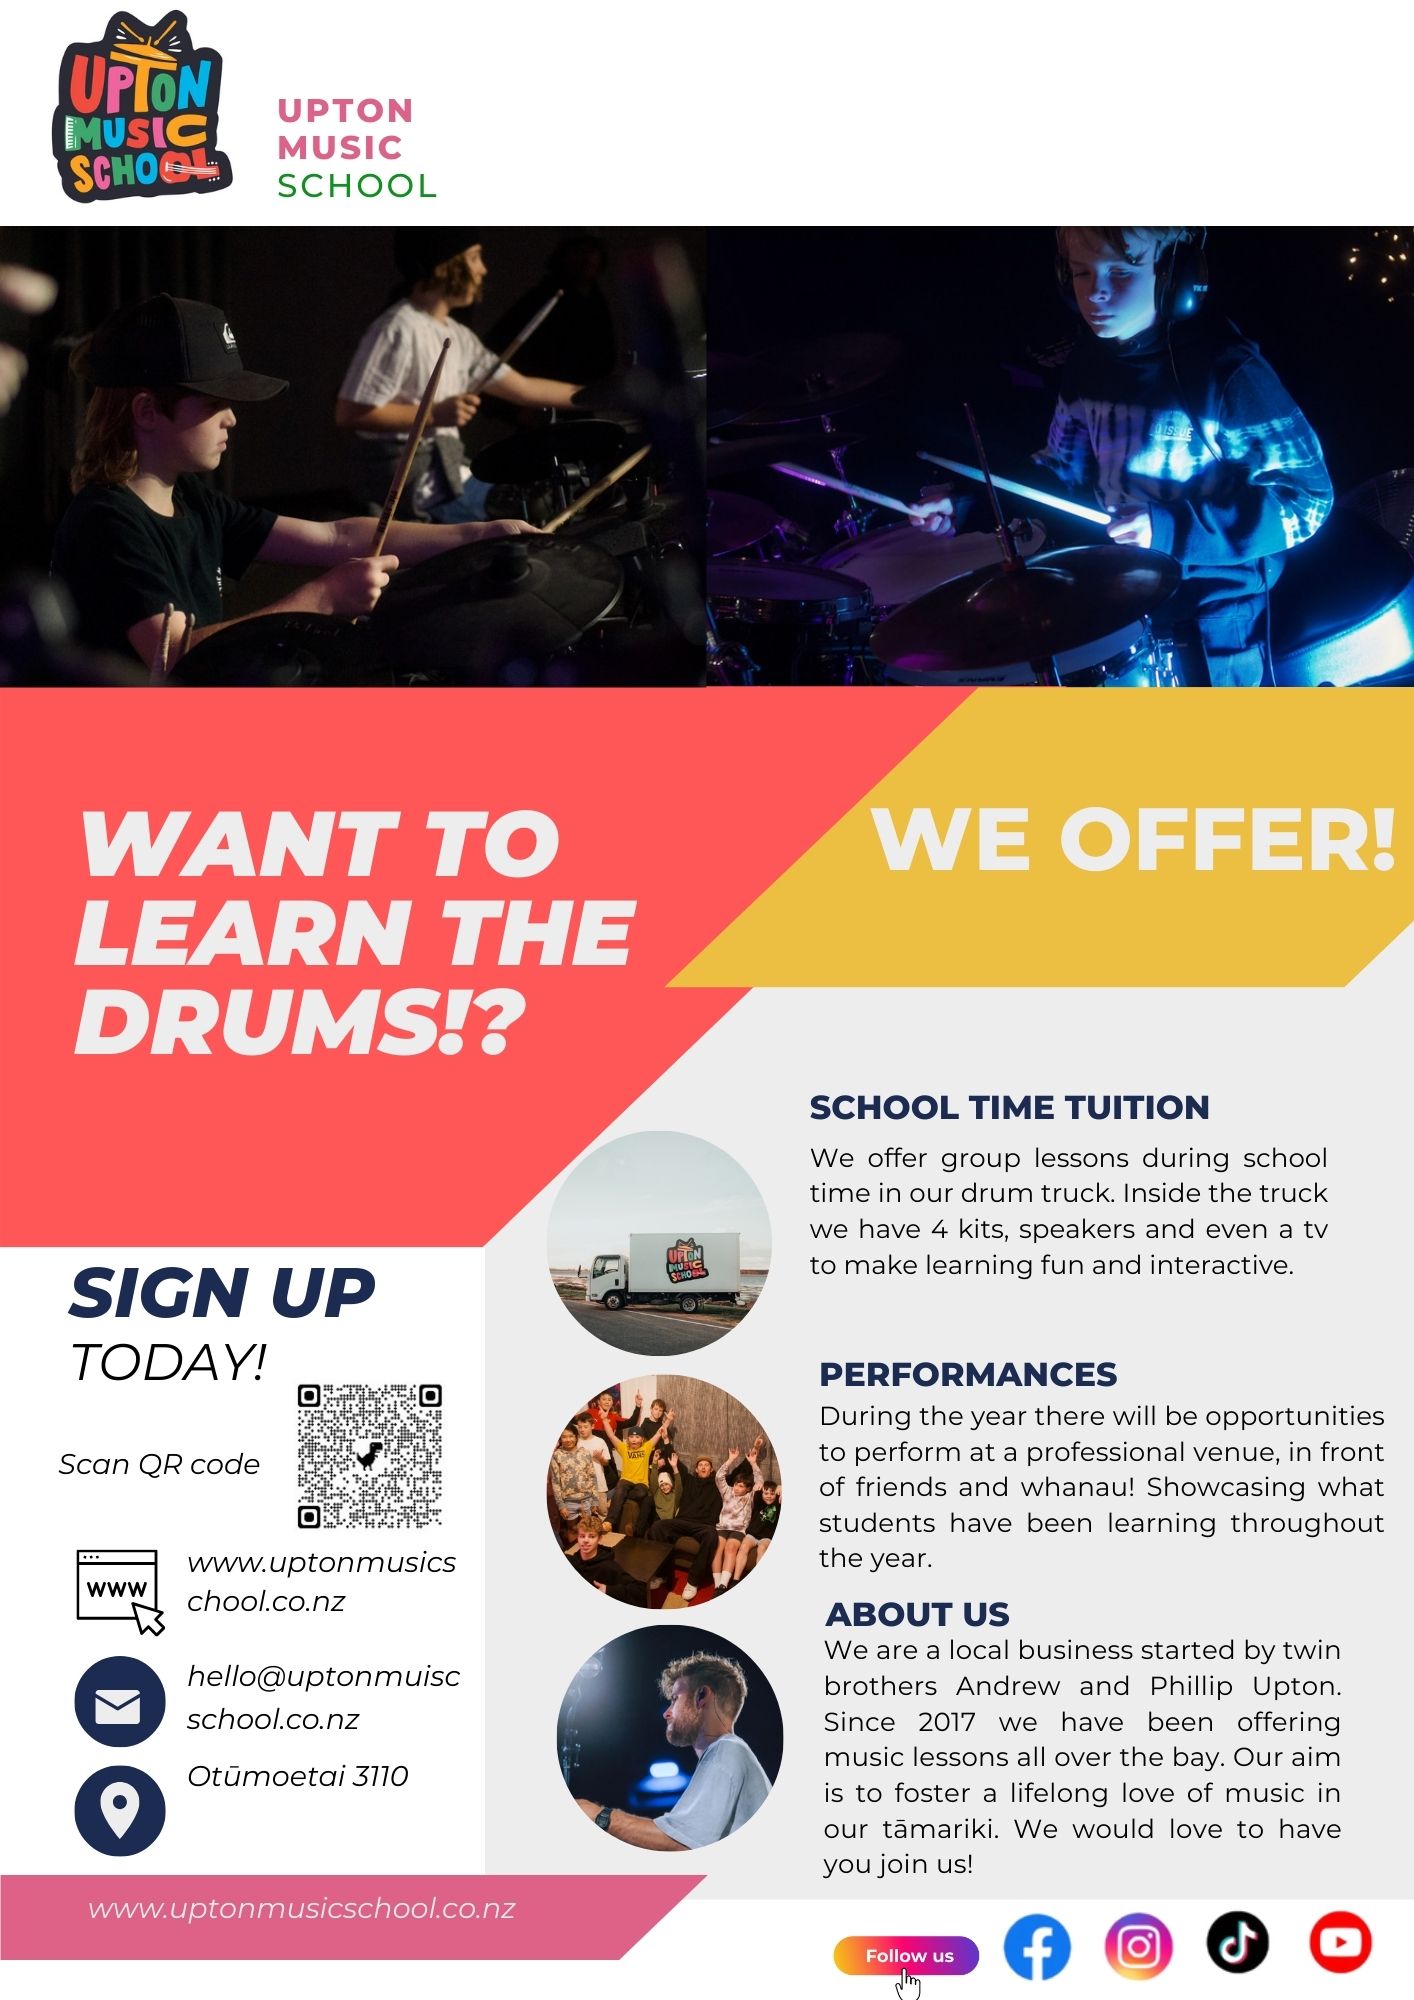 Offer to learn drums from Upton Music